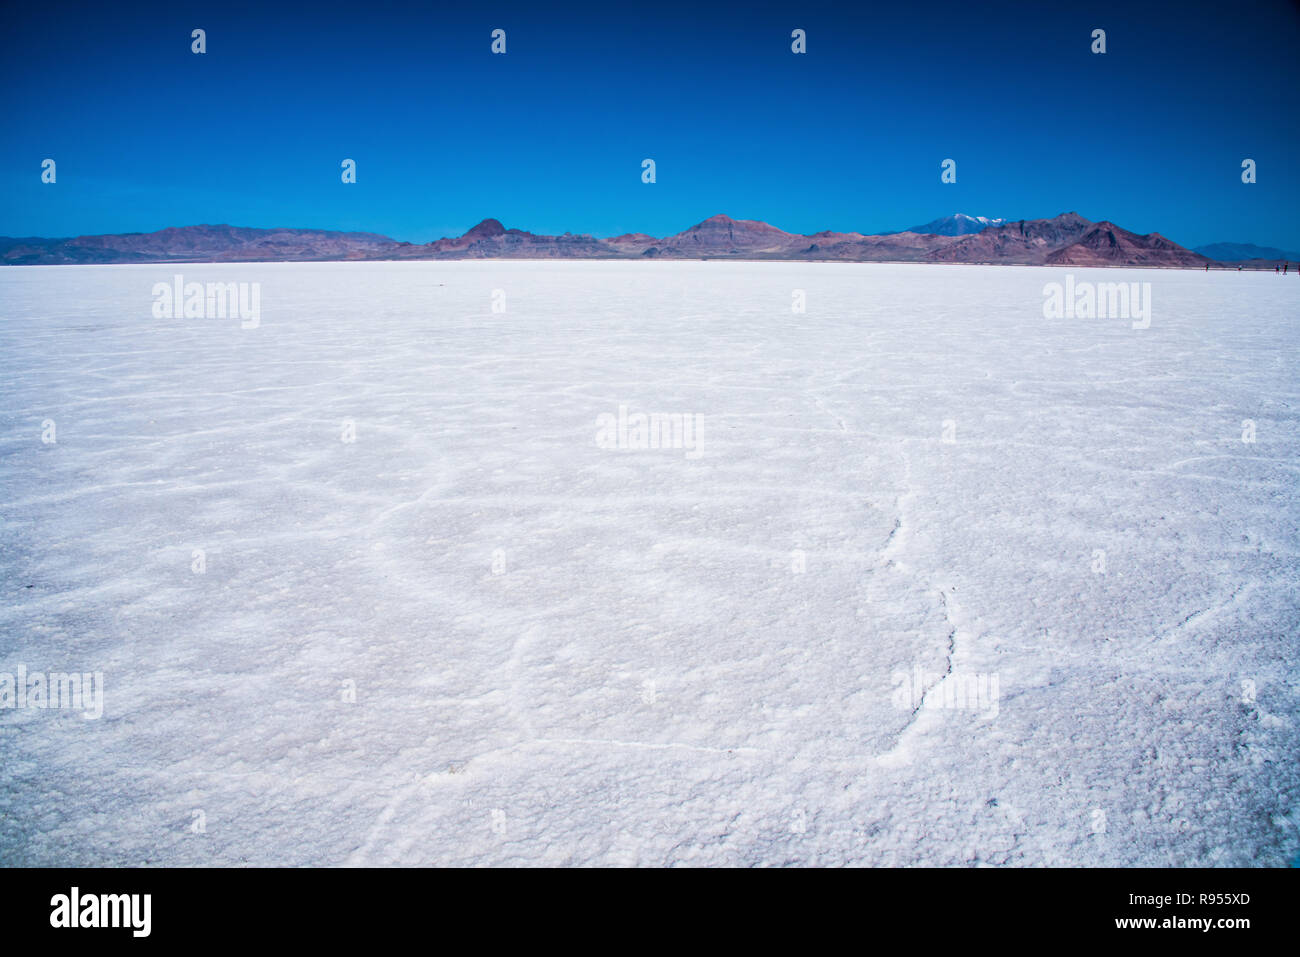 The Bonneville Salt Flats in western Utah, with mountain peaks in the background. Stock Photo